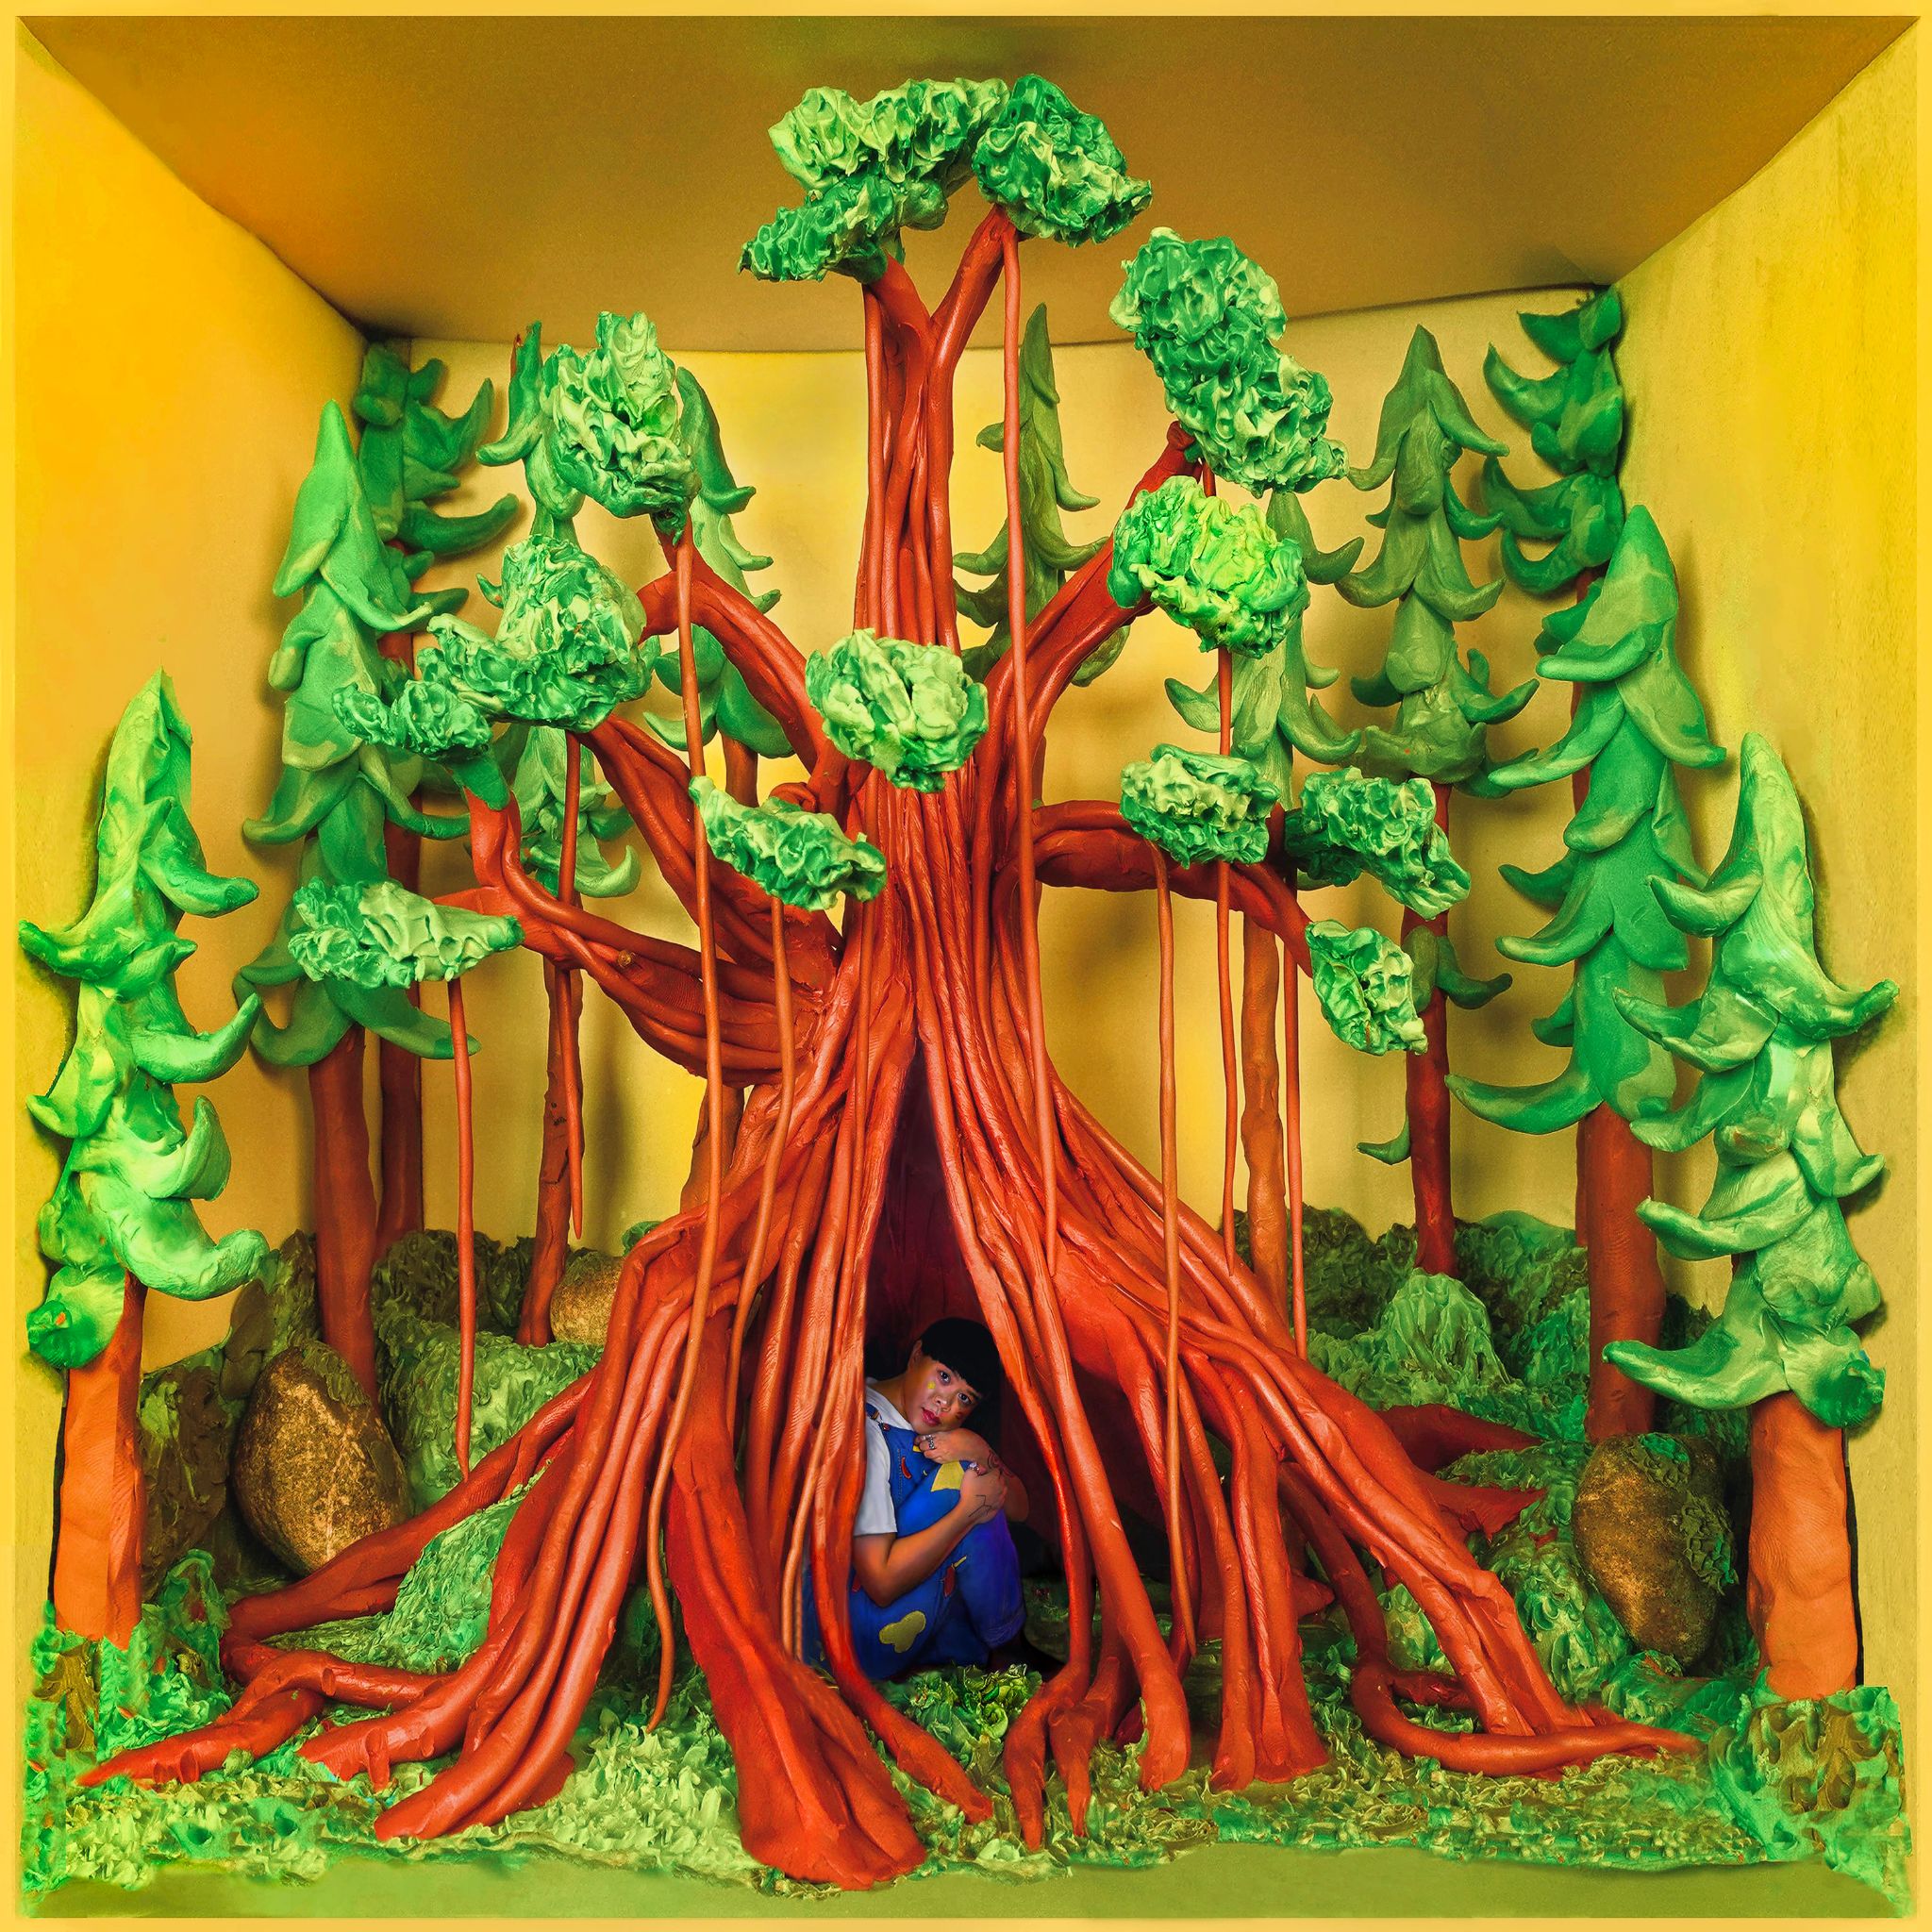 An album cover featuring a clay-molded forest in a yellow box, and a wide, hollow tree stump in the middle, inside which Kimmortal sits holding their legs and looking out playfully. They’re wearing royal blue overalls and have black hair with straight-cut bangs.